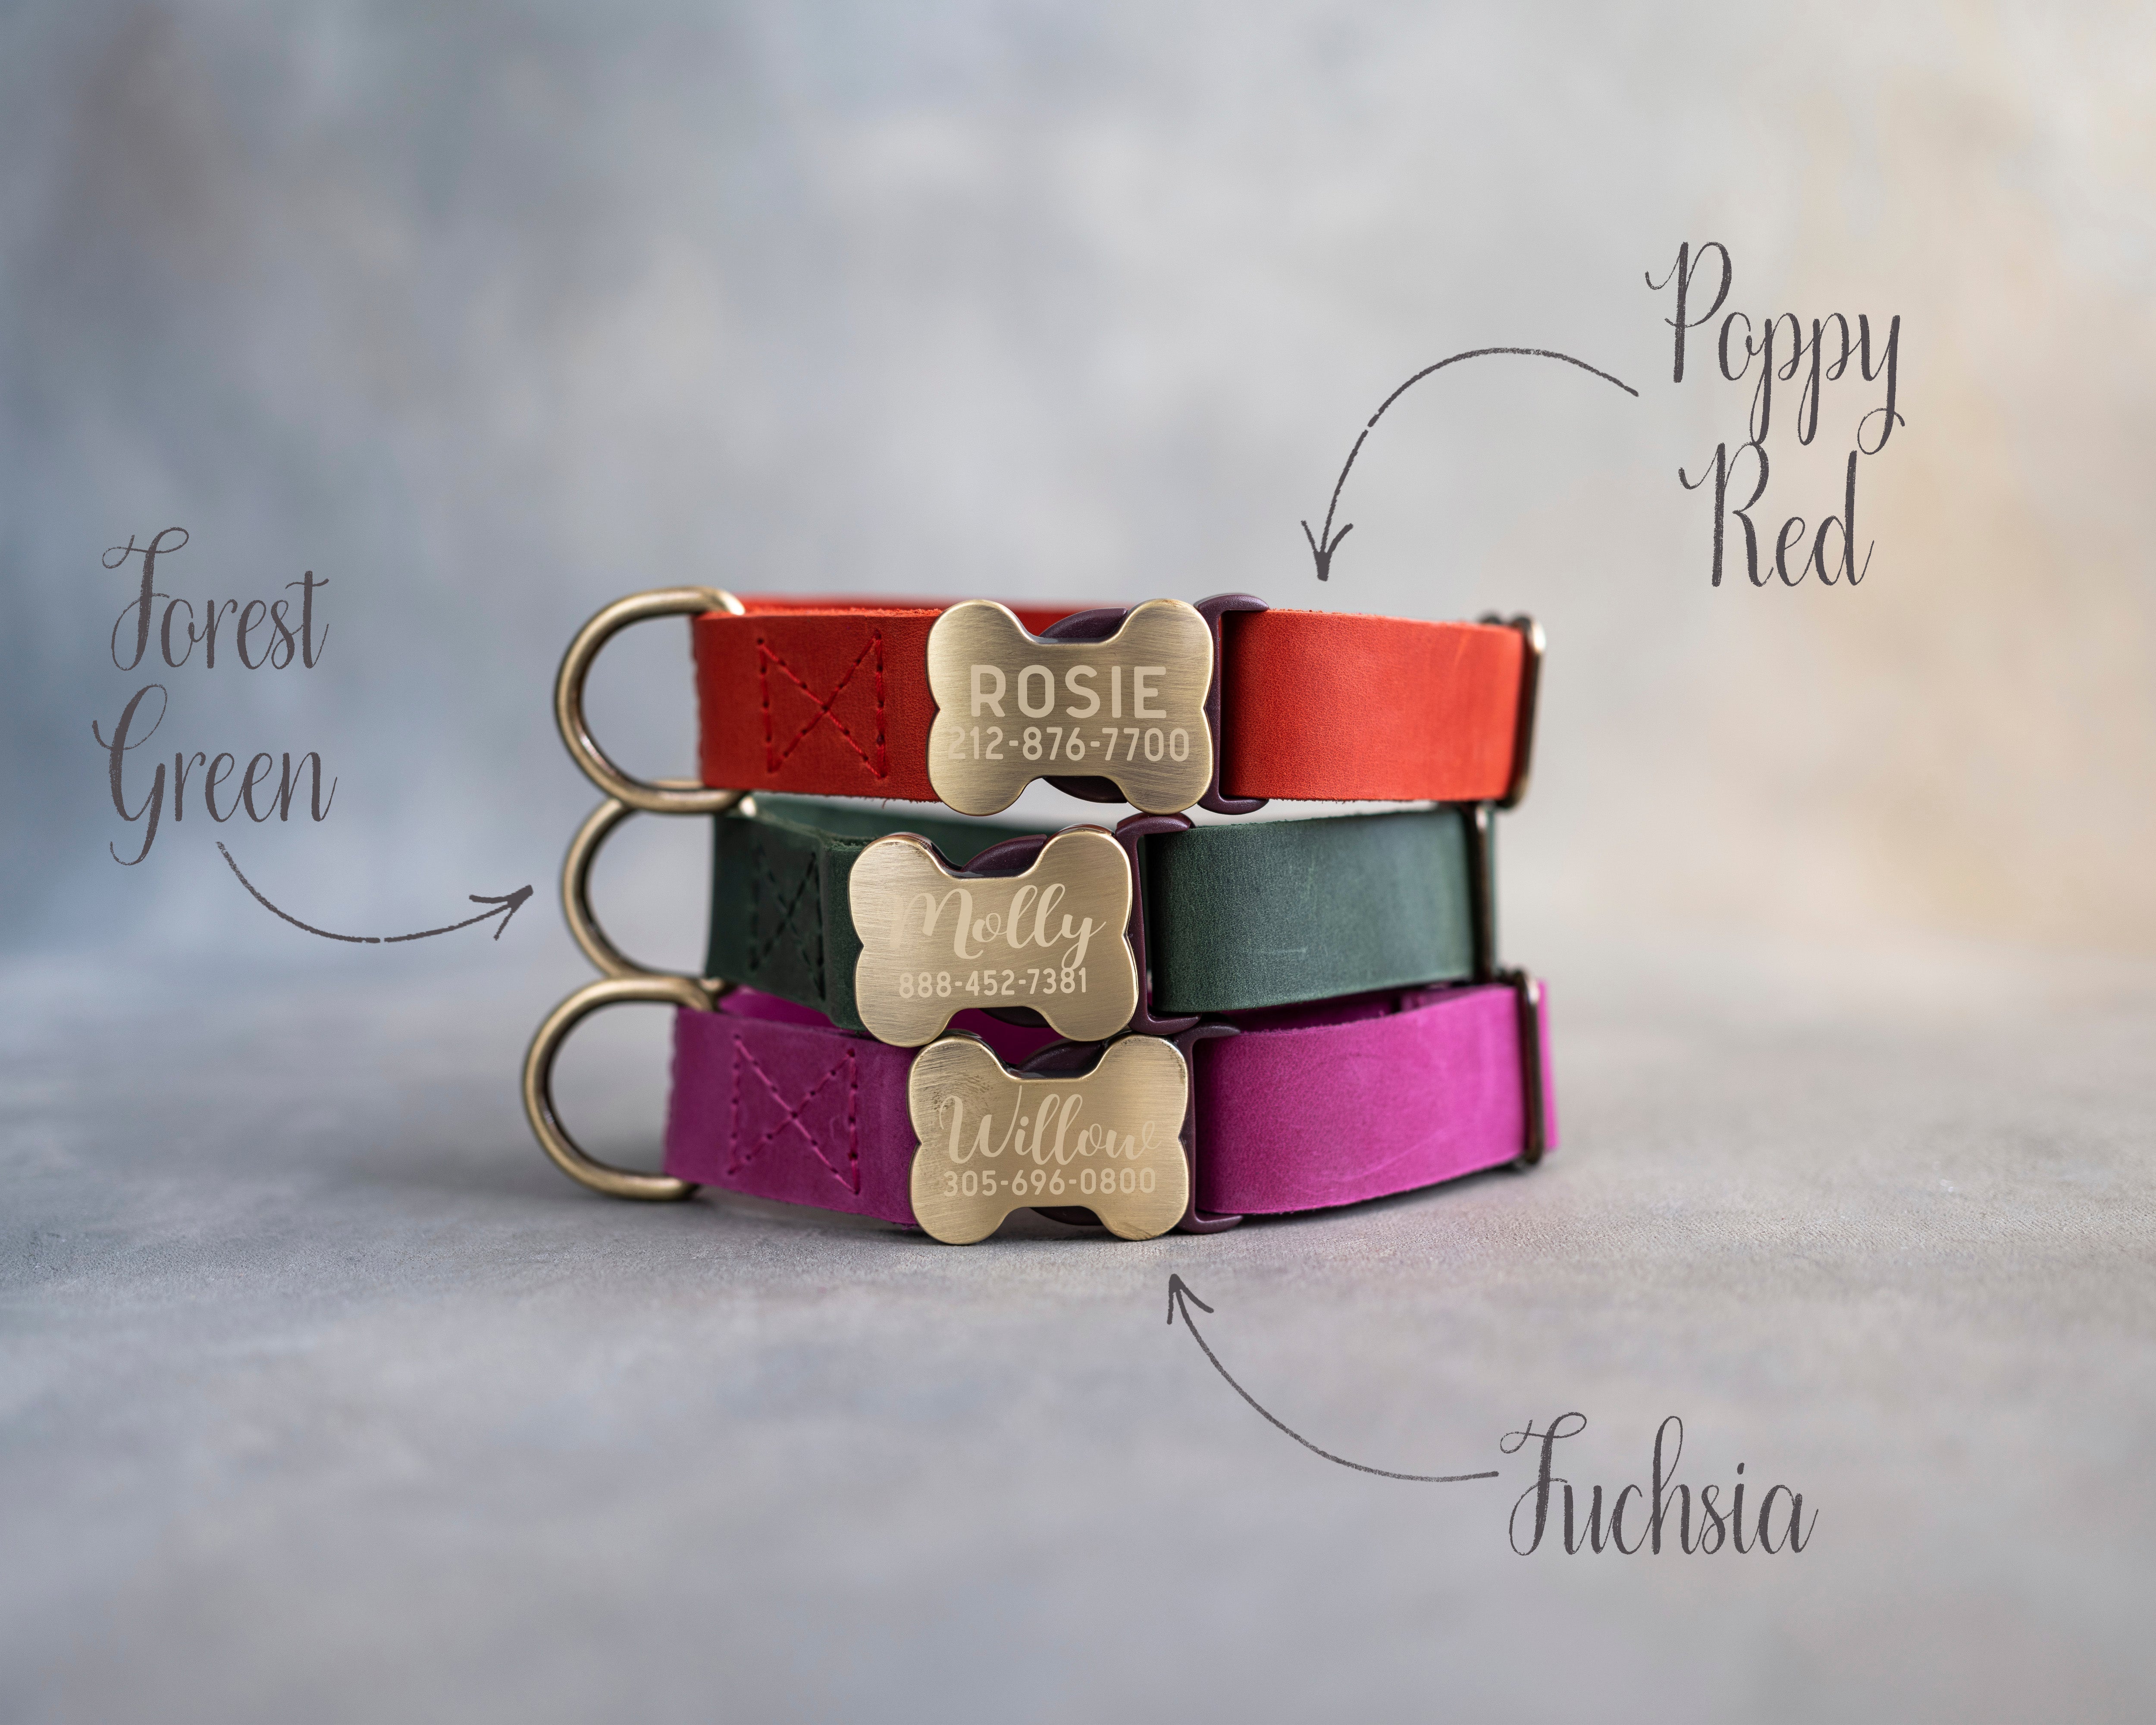 Personalized leather dog collar for girls